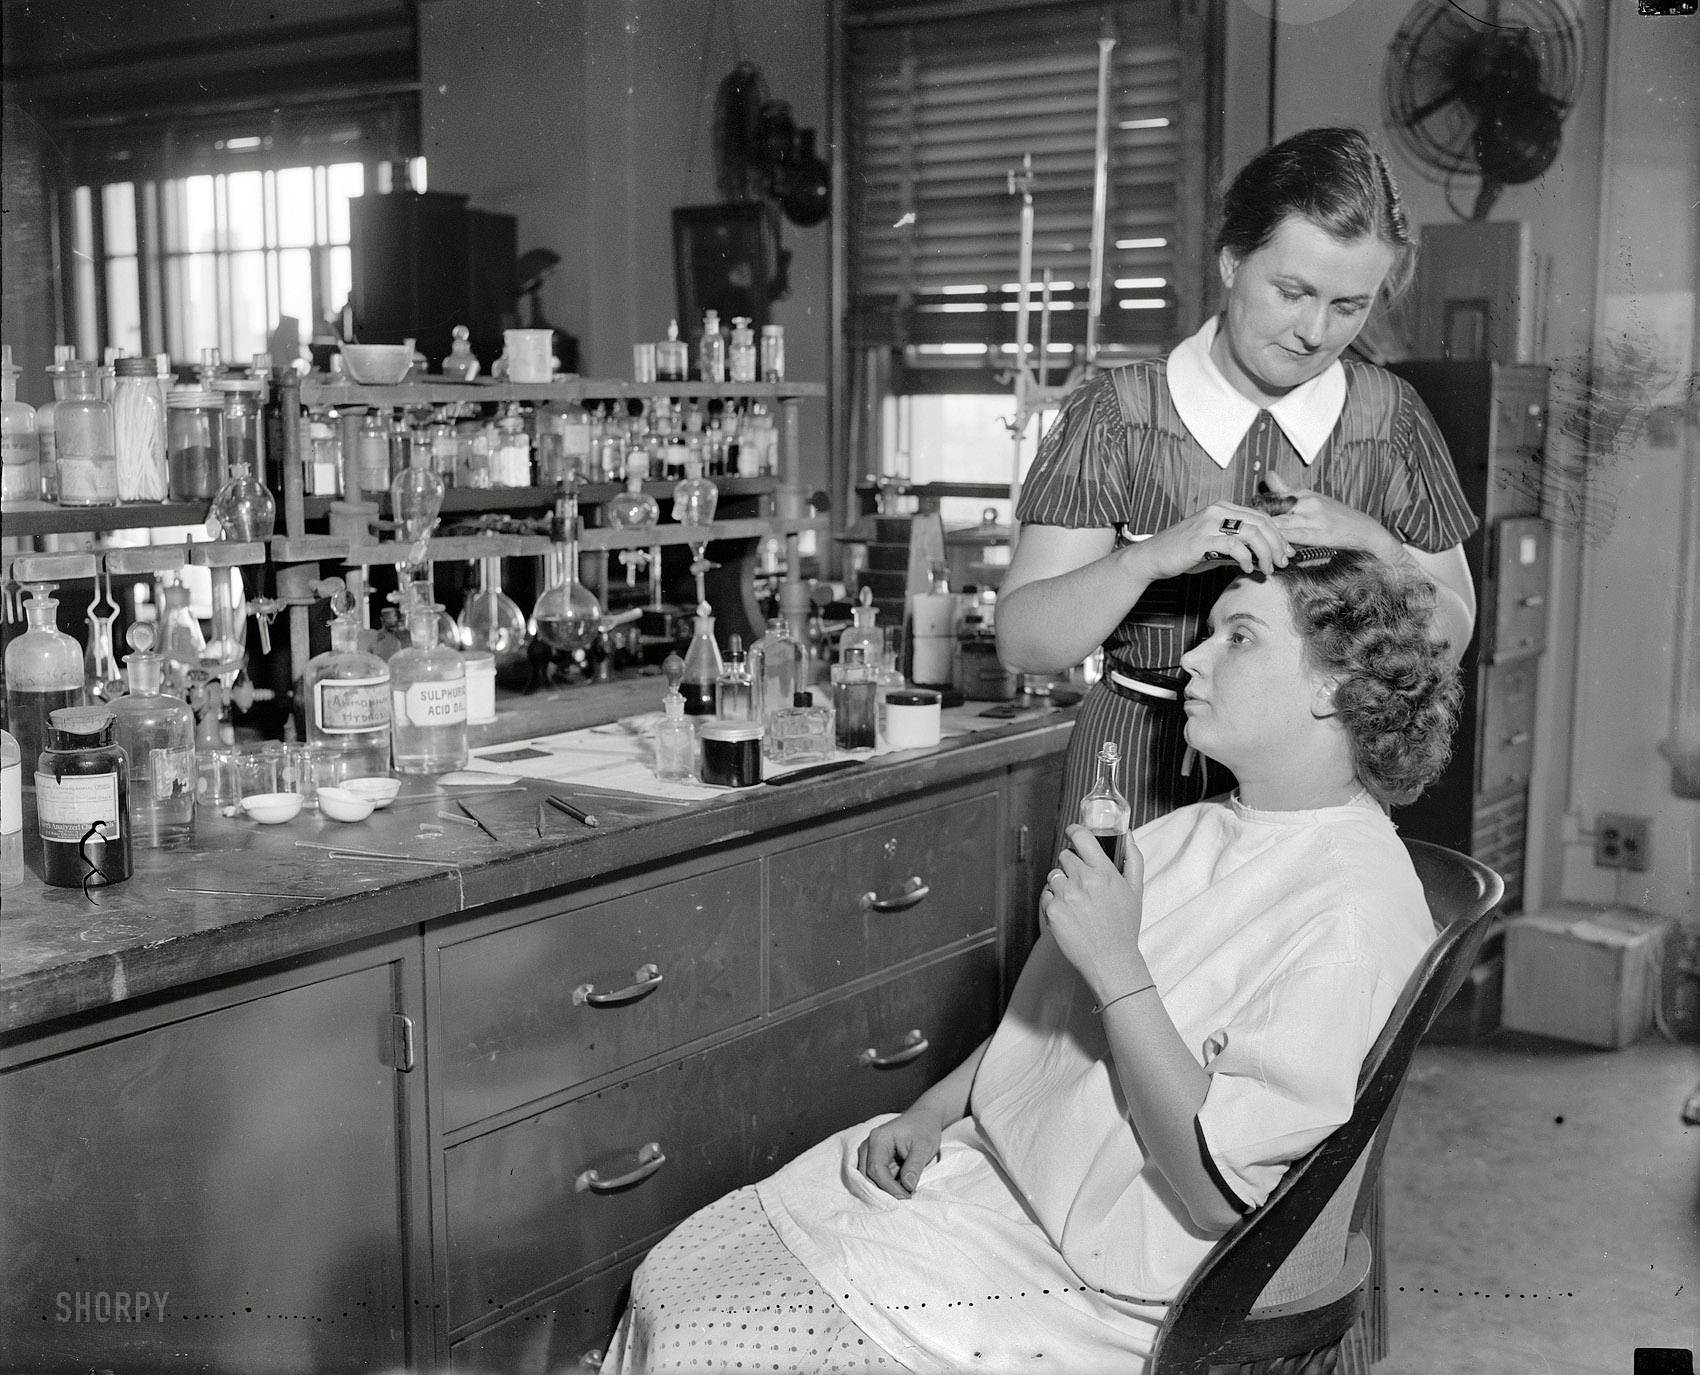 July 10, 1937. Washington, D.C. "Testing cosmetics for the government. Mrs. R. Goodman is shown sitting with Mrs. C.R. West applying dye for the hair. Some dyes contain lead and the poison in the dye may lead to chronic poisoning. The Department of Agriculture is continually on the lookout for false labels and advertising." Harris & Ewing Collection glass negative. View full size.